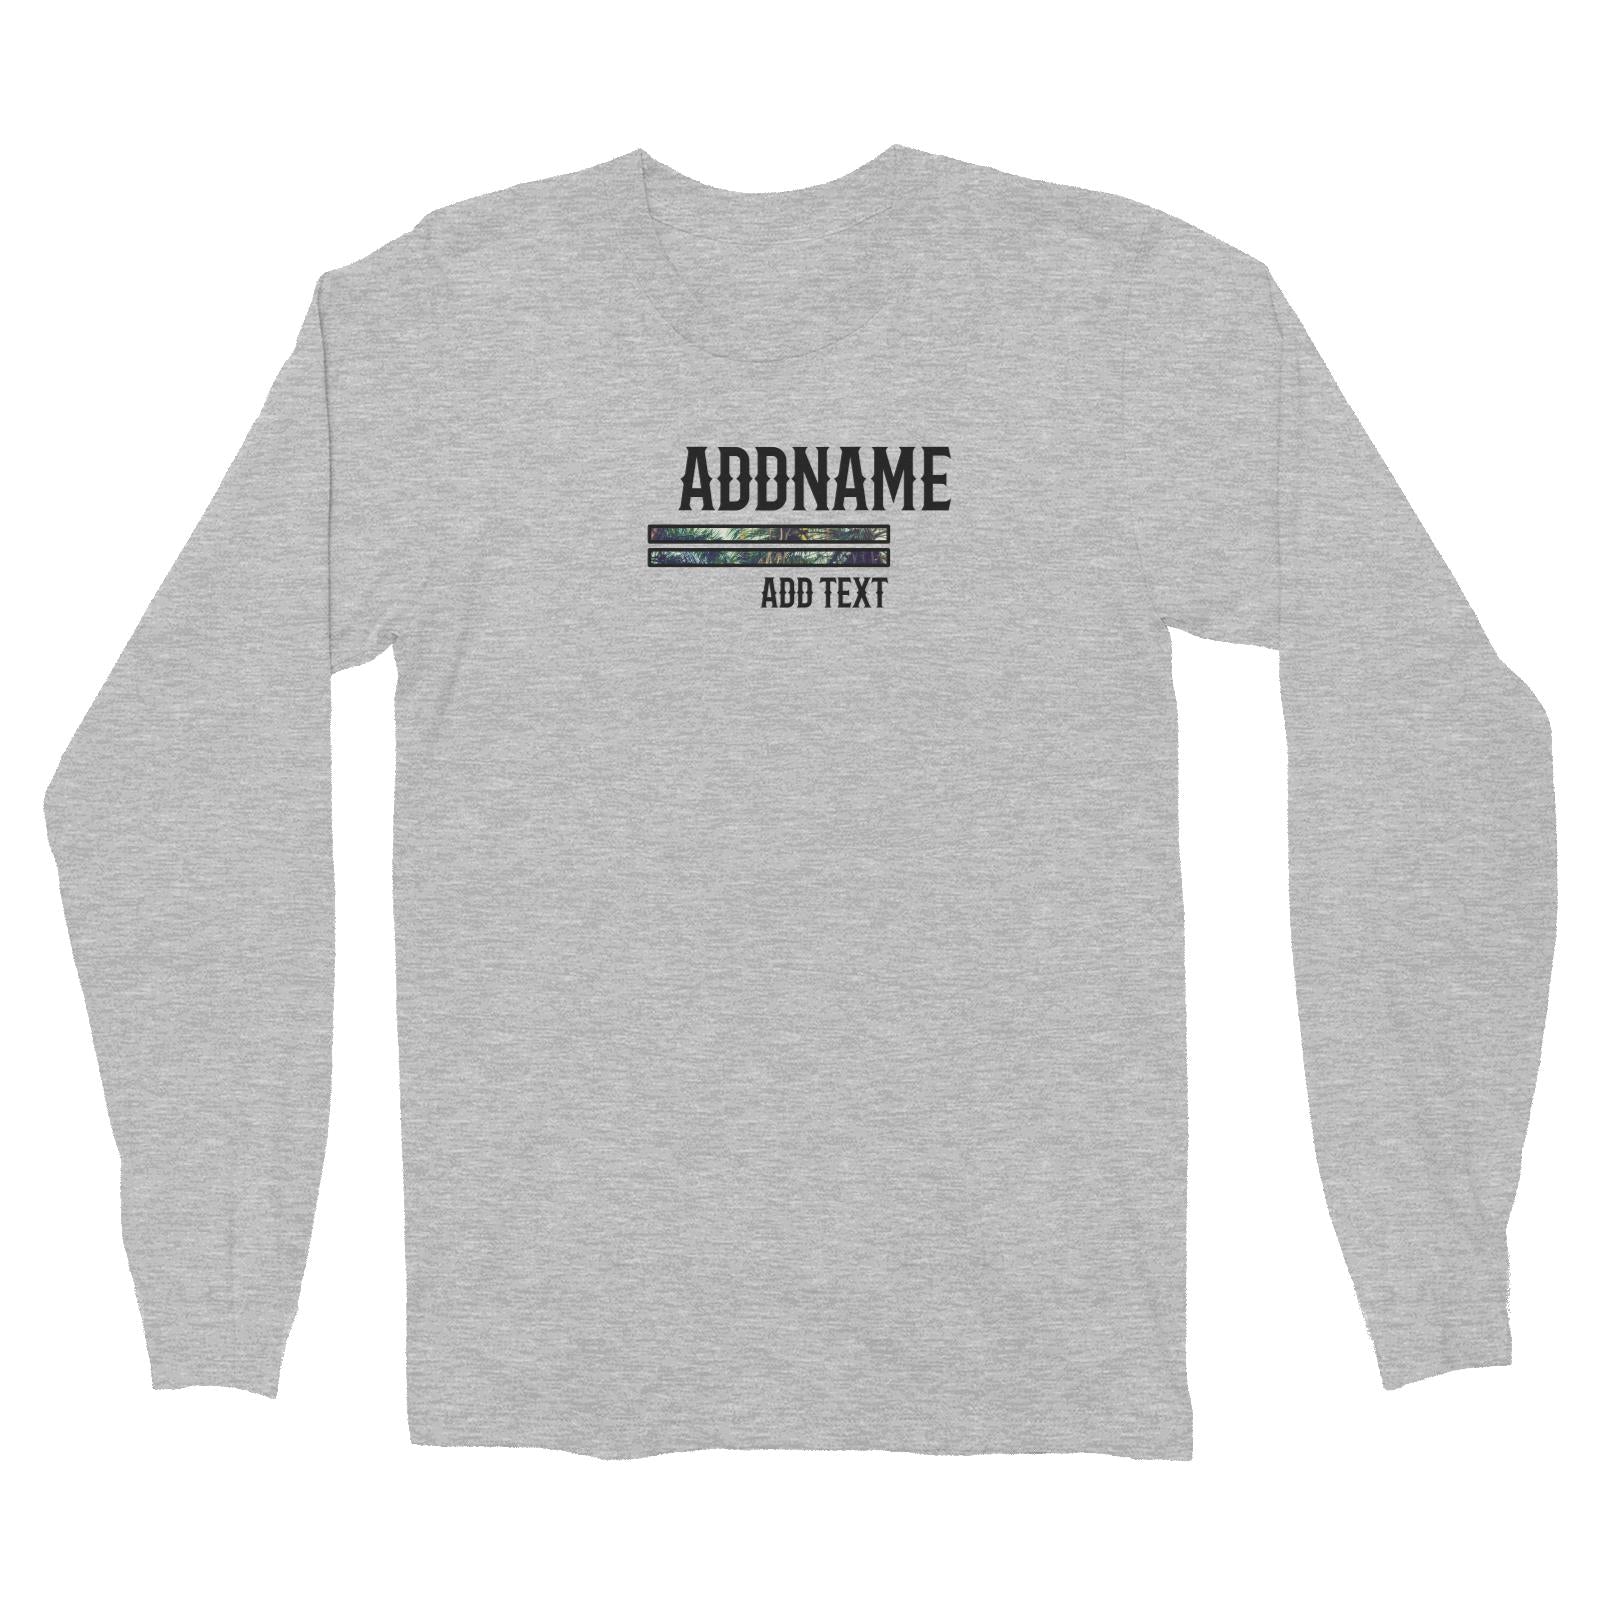 Beach Trees Bars Personalizable with Name Year and Text Long Sleeve Unisex T-Shirt